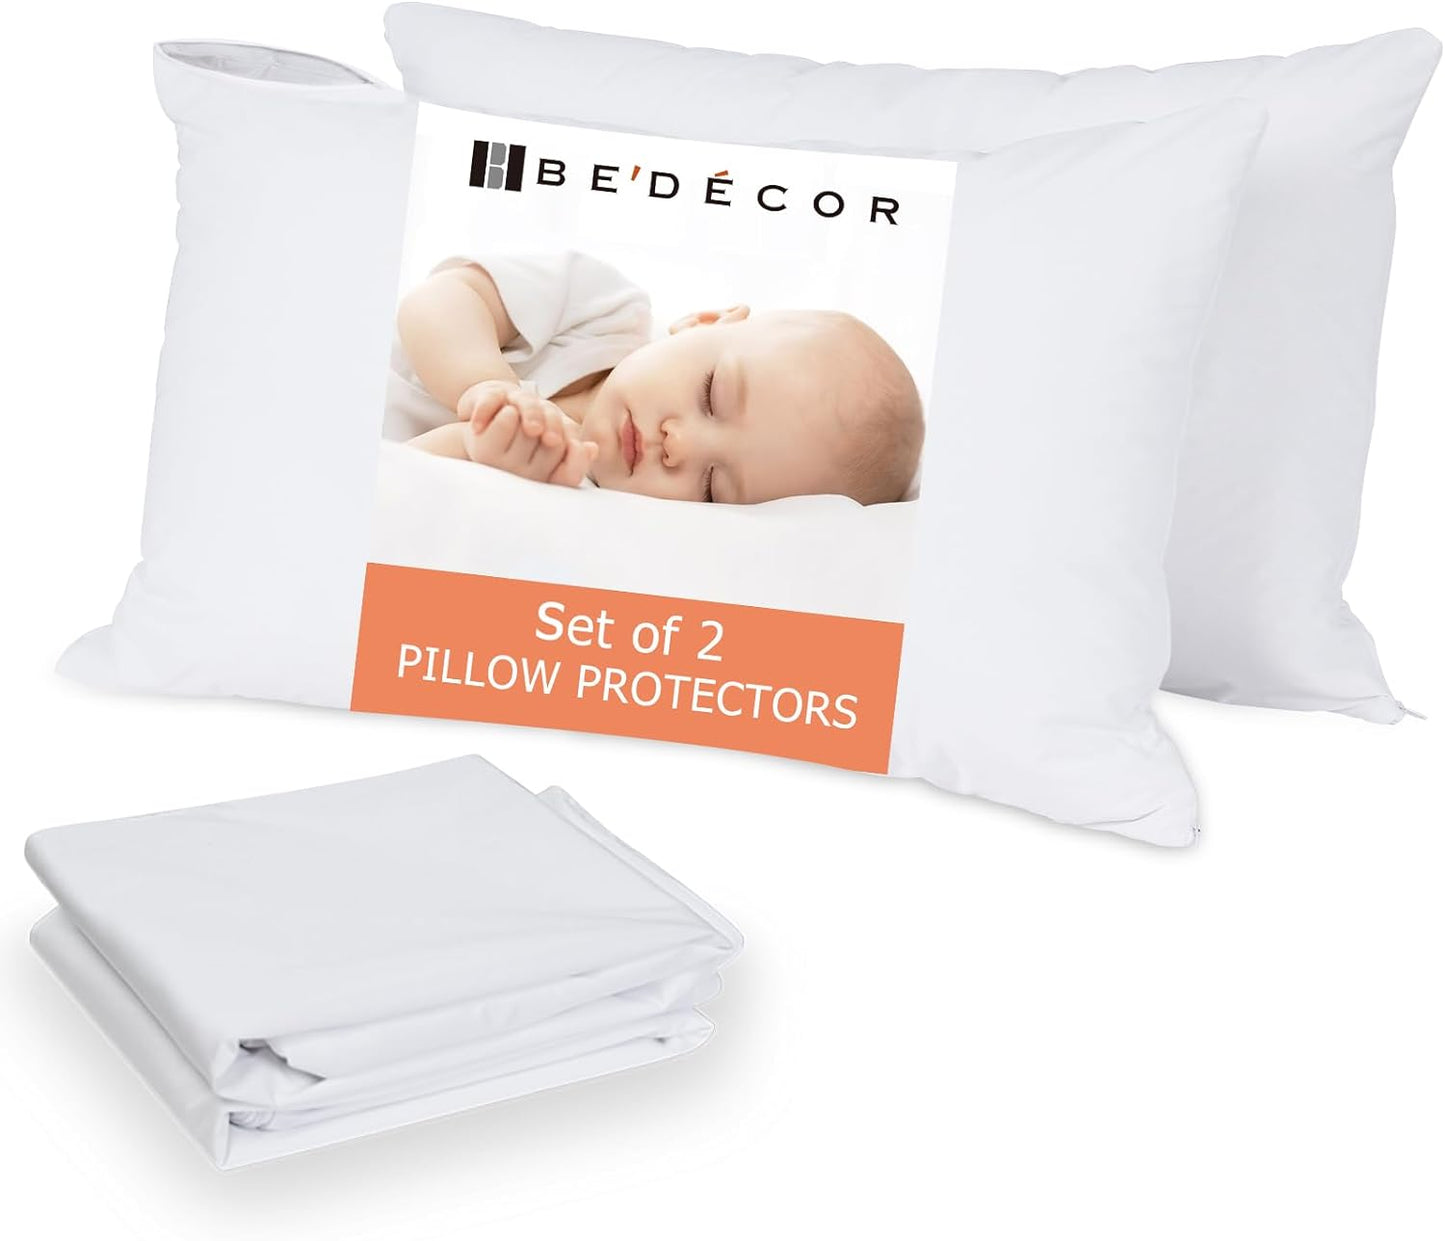 Bedecor Standard Pillow Protector with Zipper 2 Pack ,Waterproof Pillow Covers Encasement Smooth Dust Proof with Breathable Holes Allow Air to Circulate